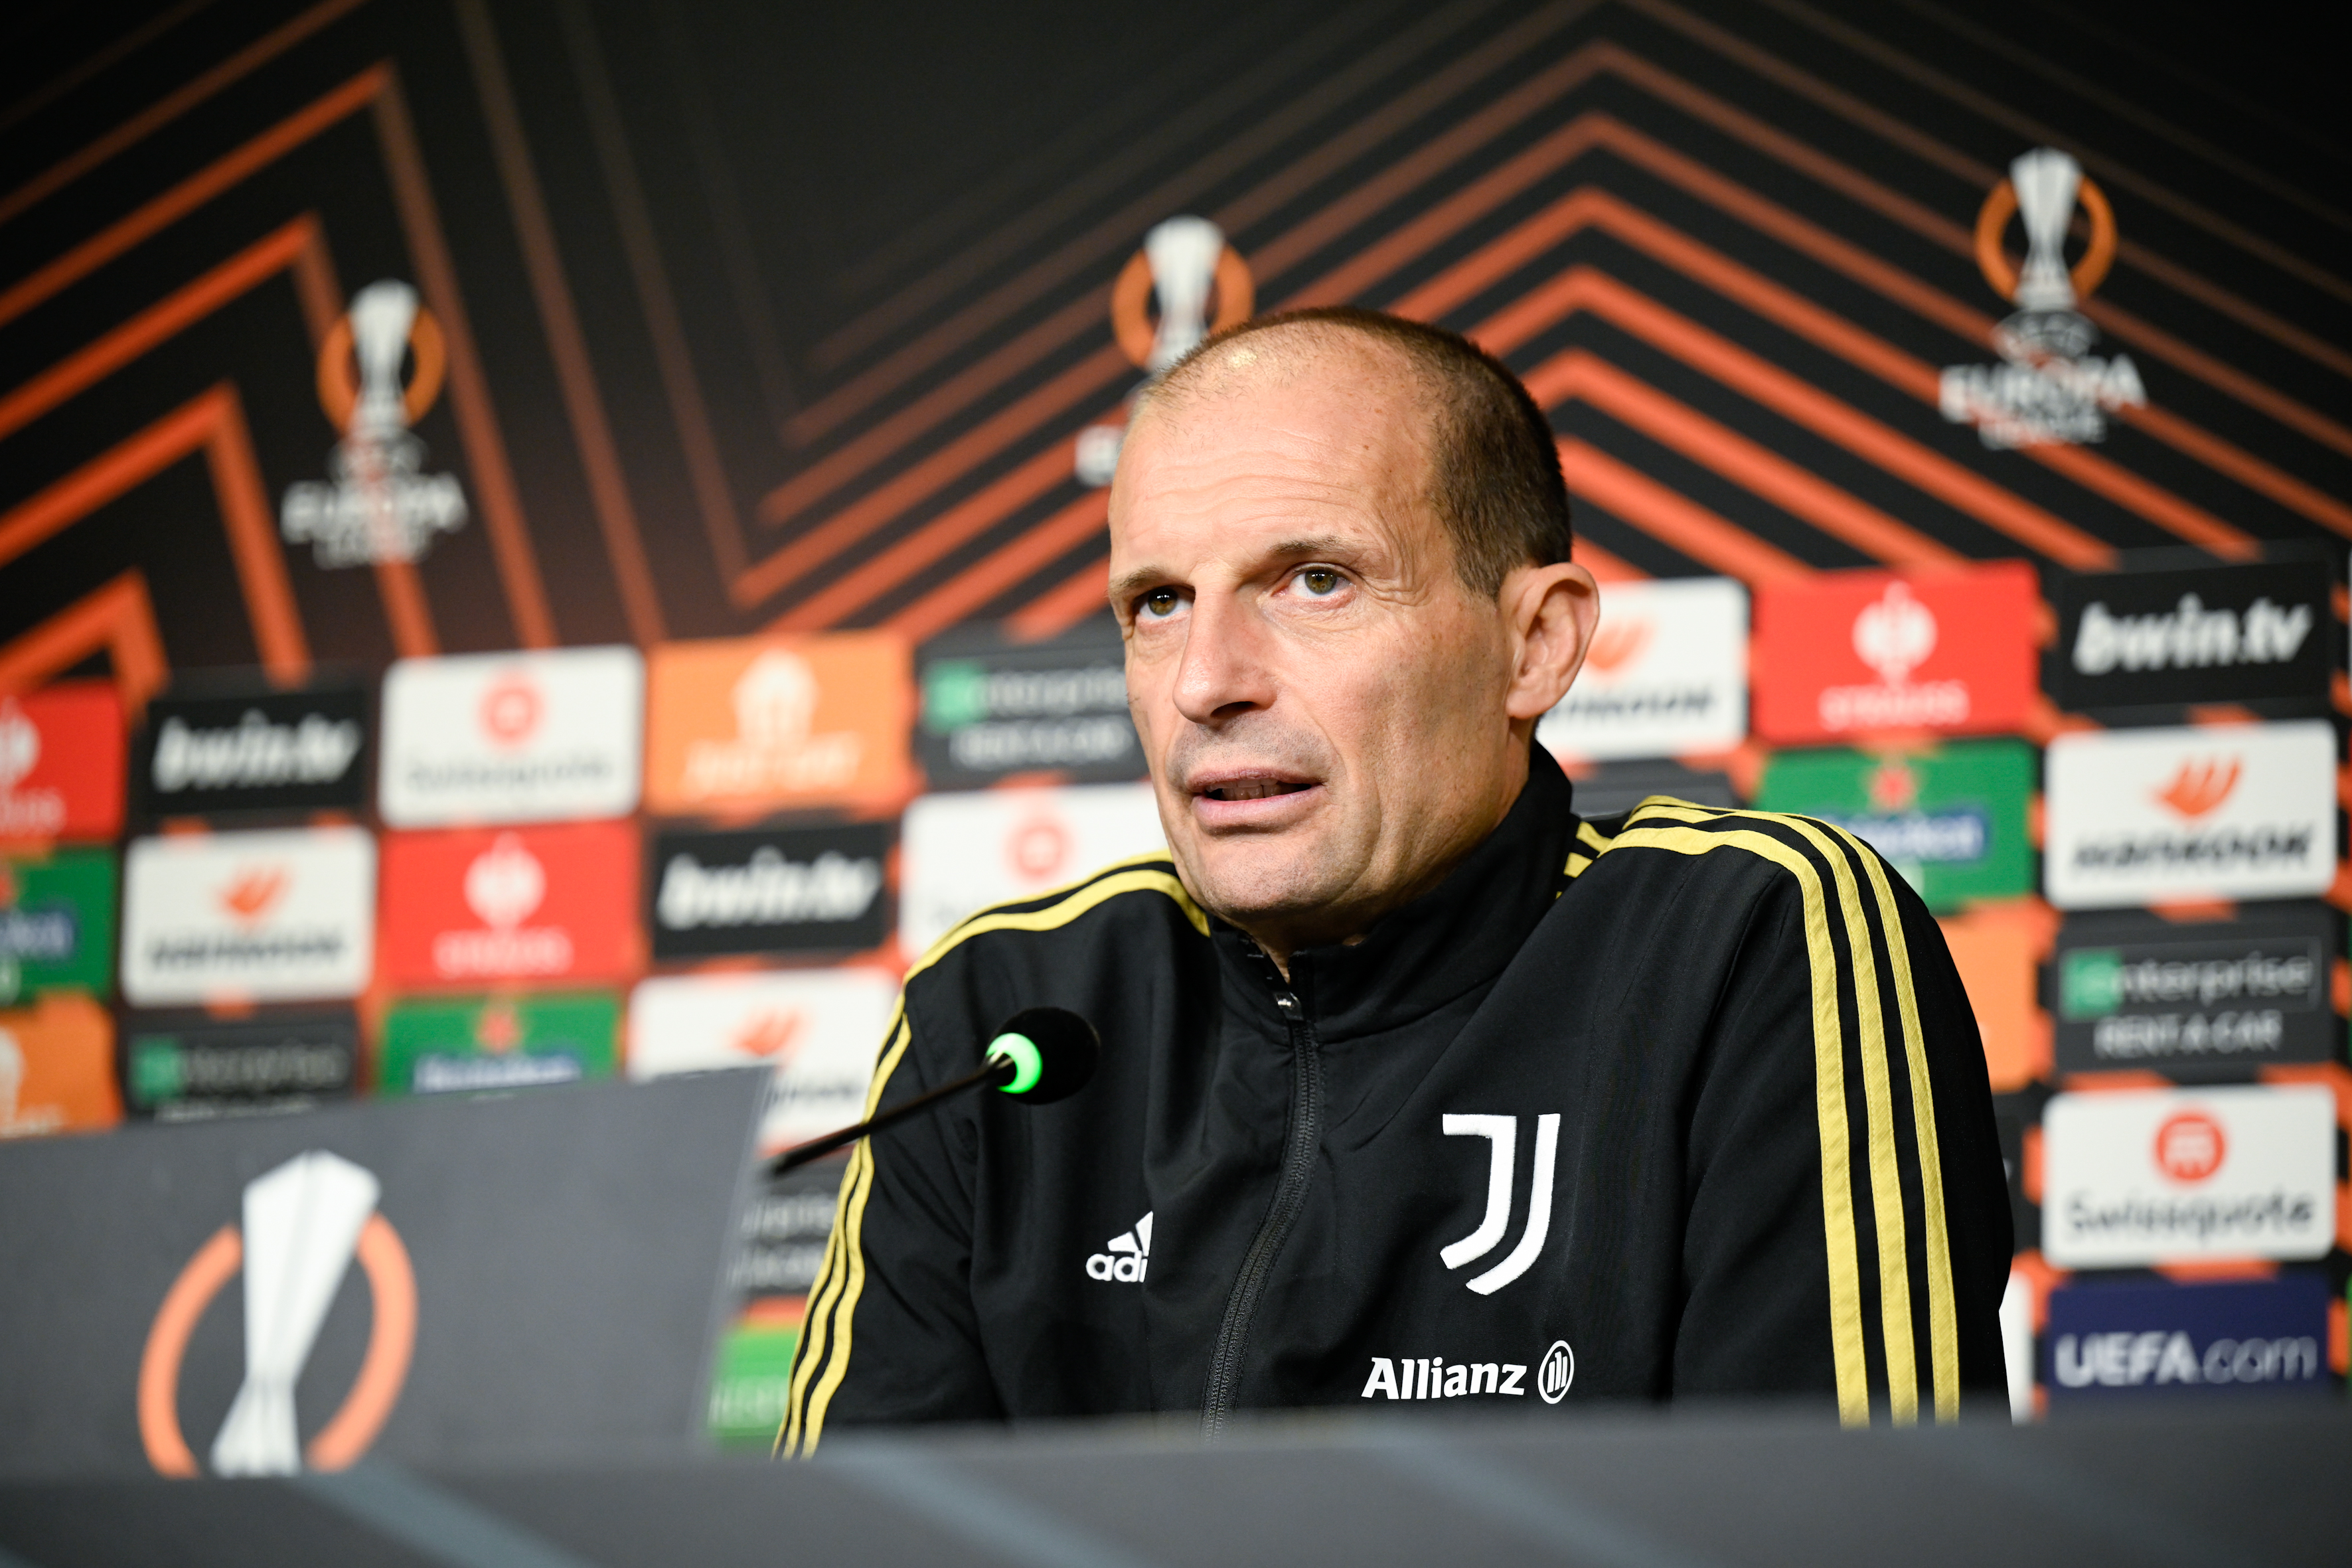 Juventus Press Conference And Training Session